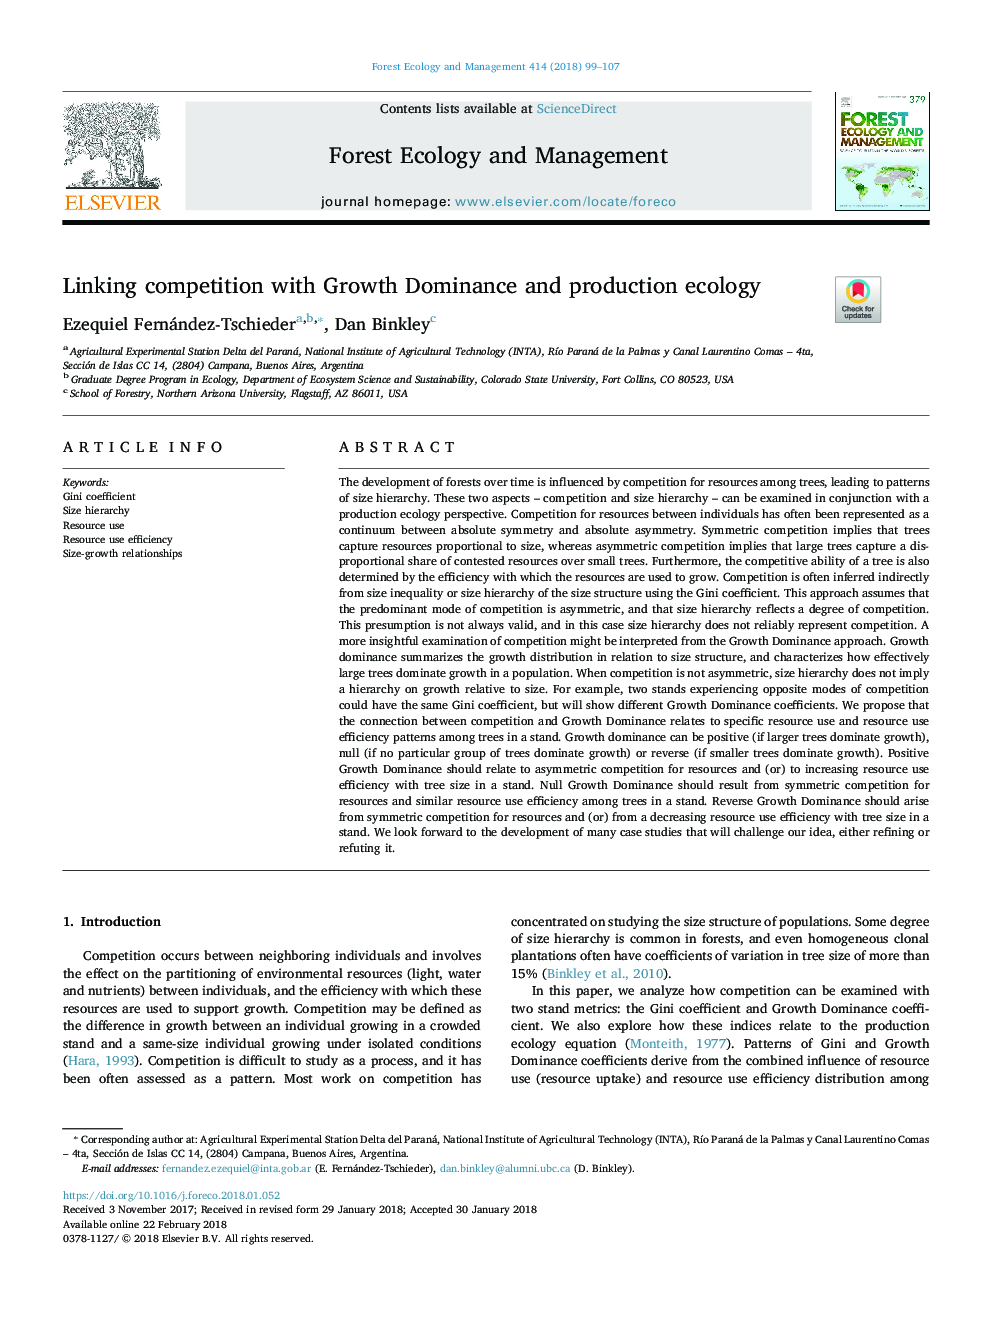 Linking competition with Growth Dominance and production ecology